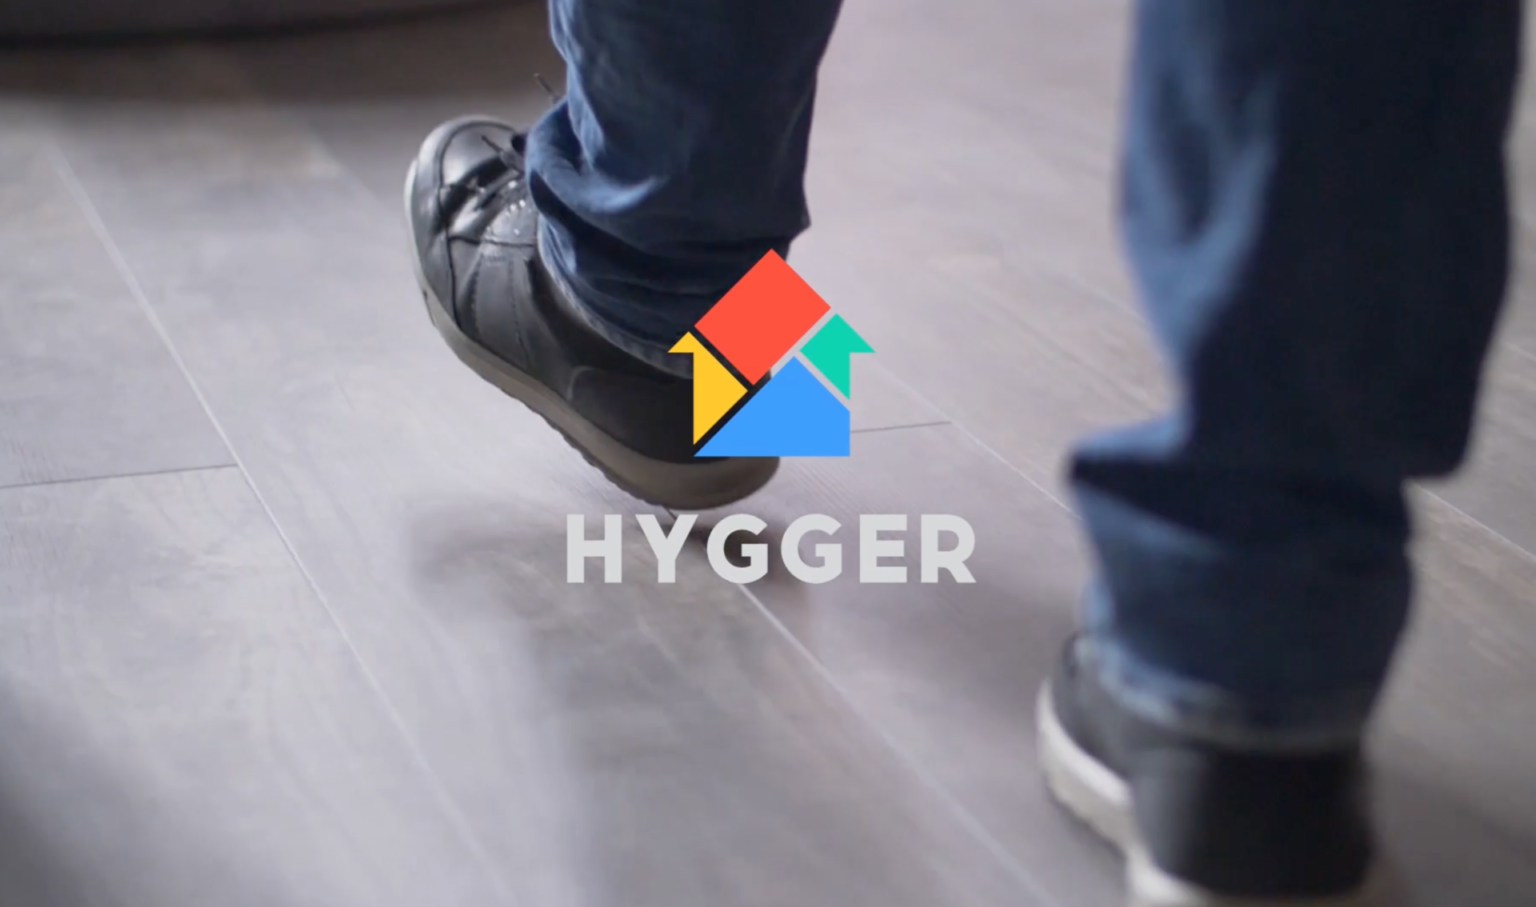 Video Pitch from Hygger CEO and Founder cover